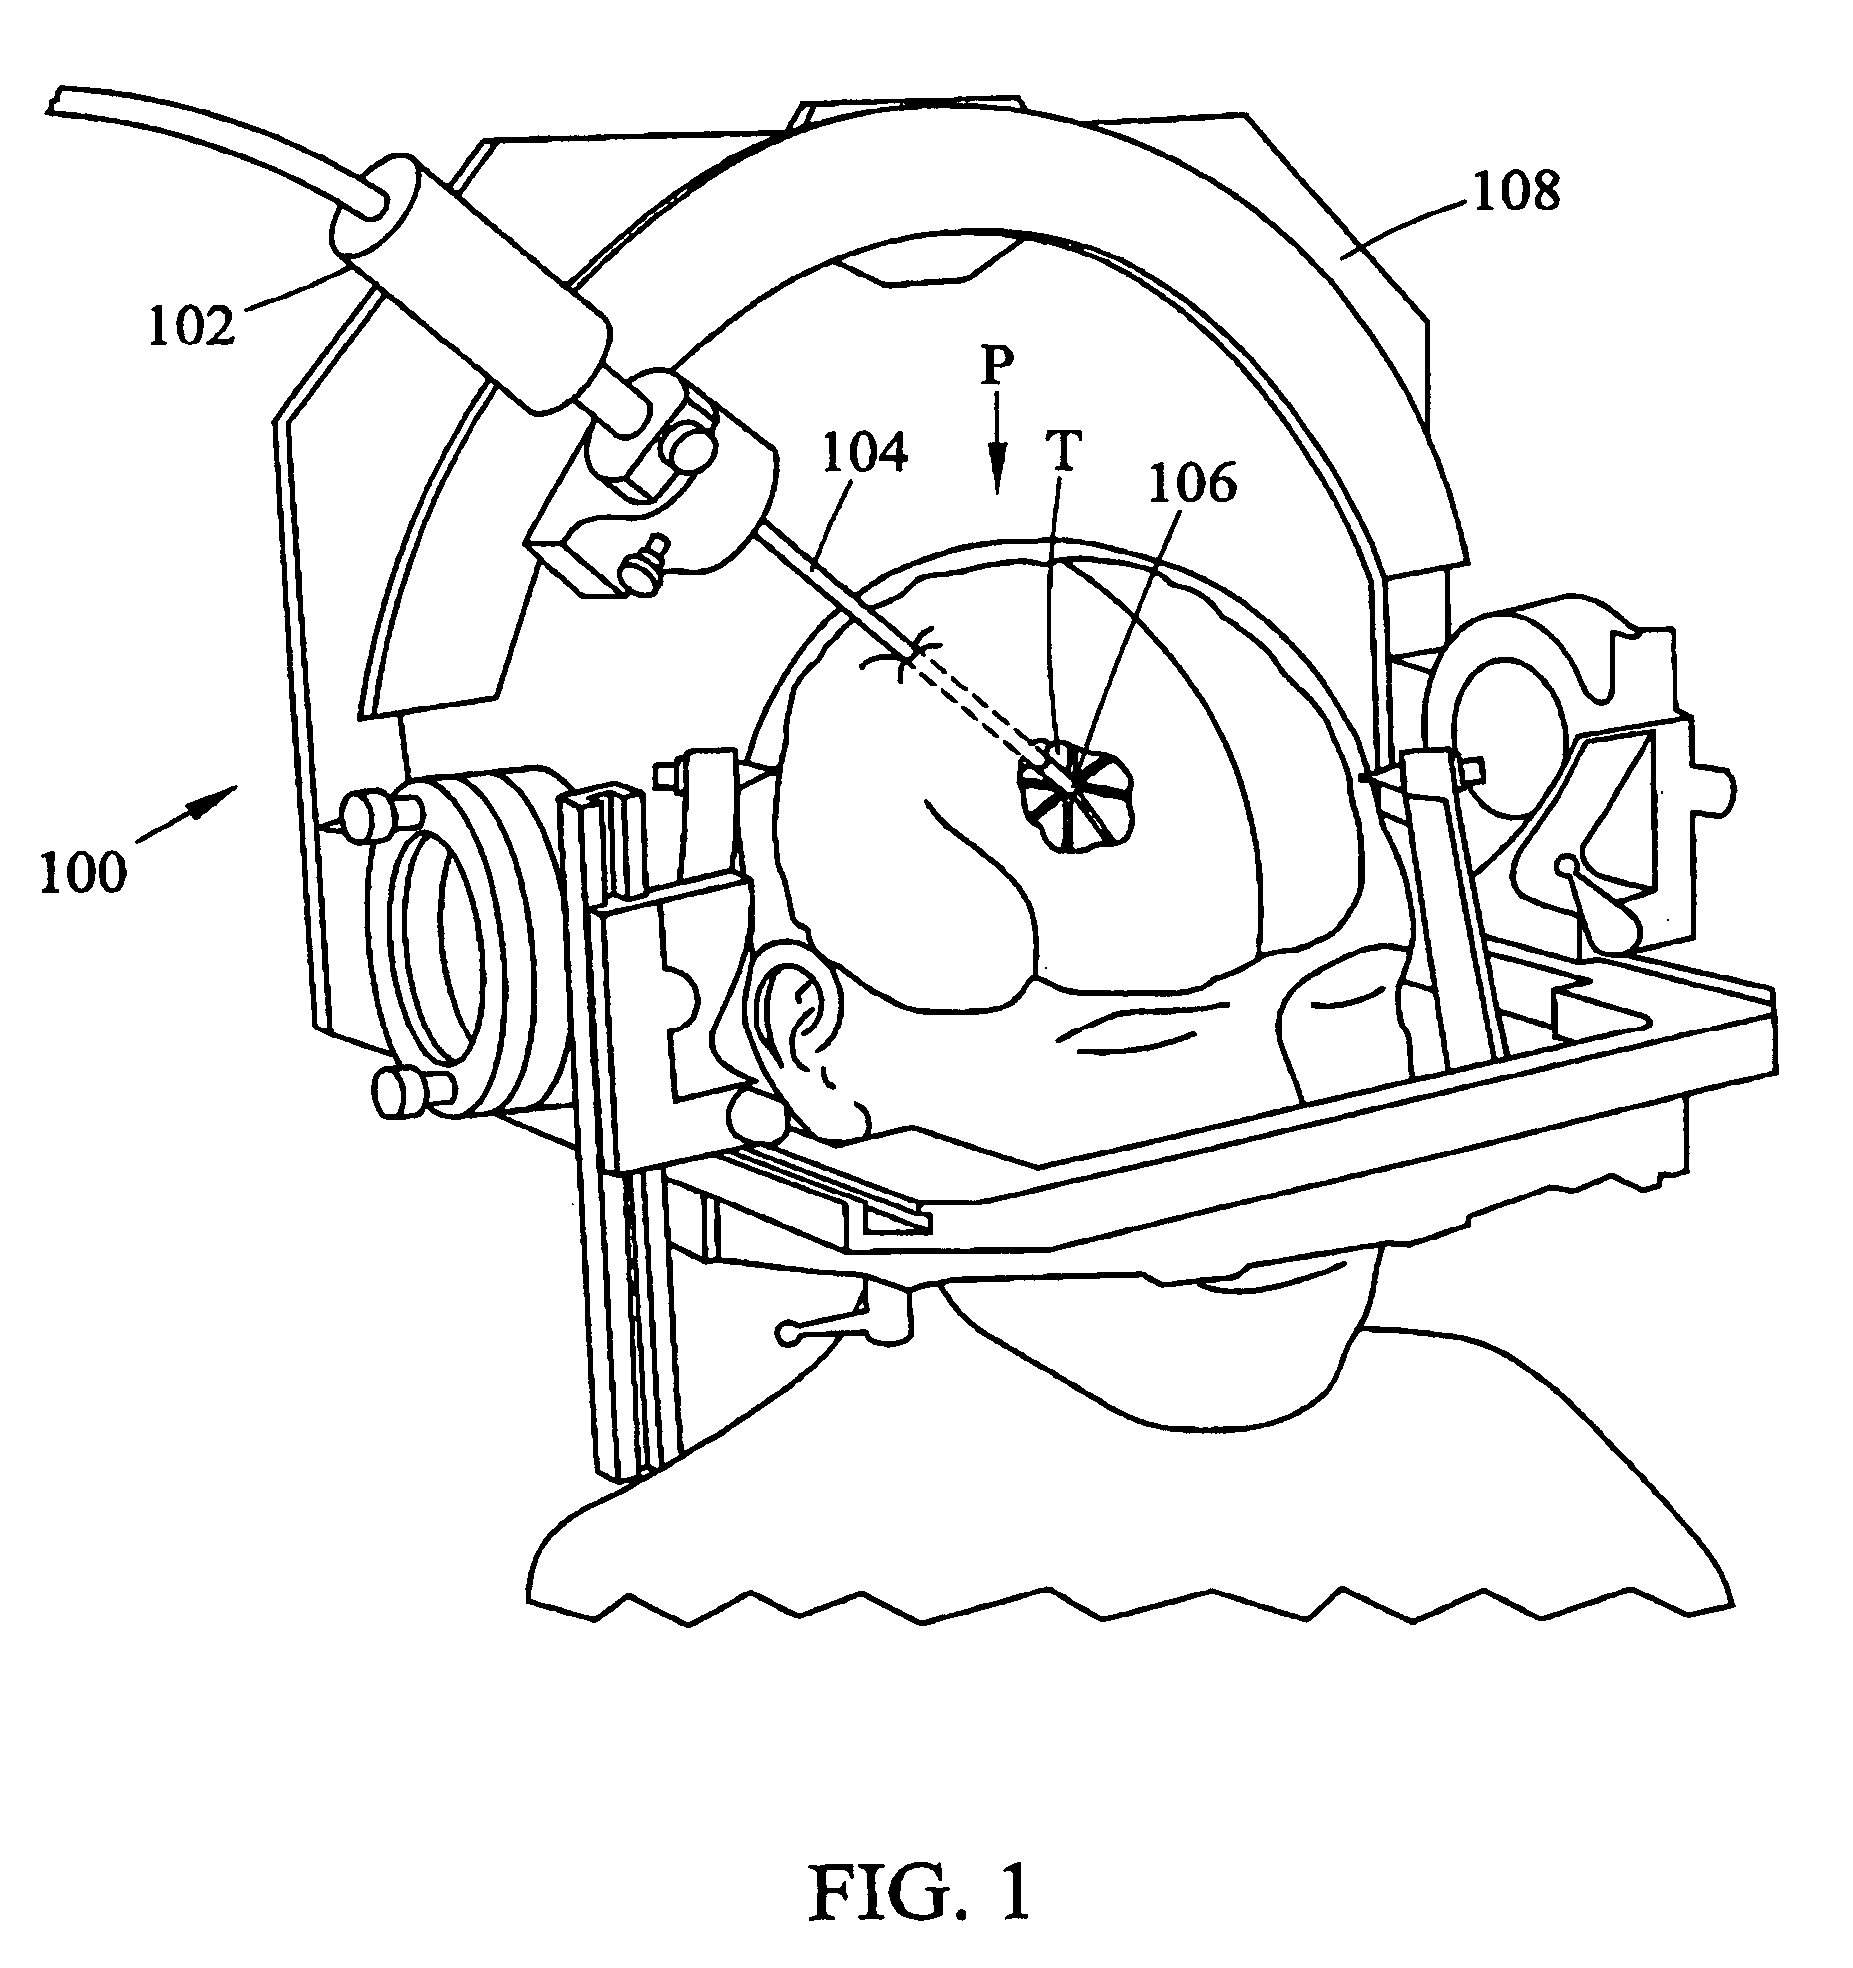 Devices and methods for targeting interior cancers with ionizing radiation